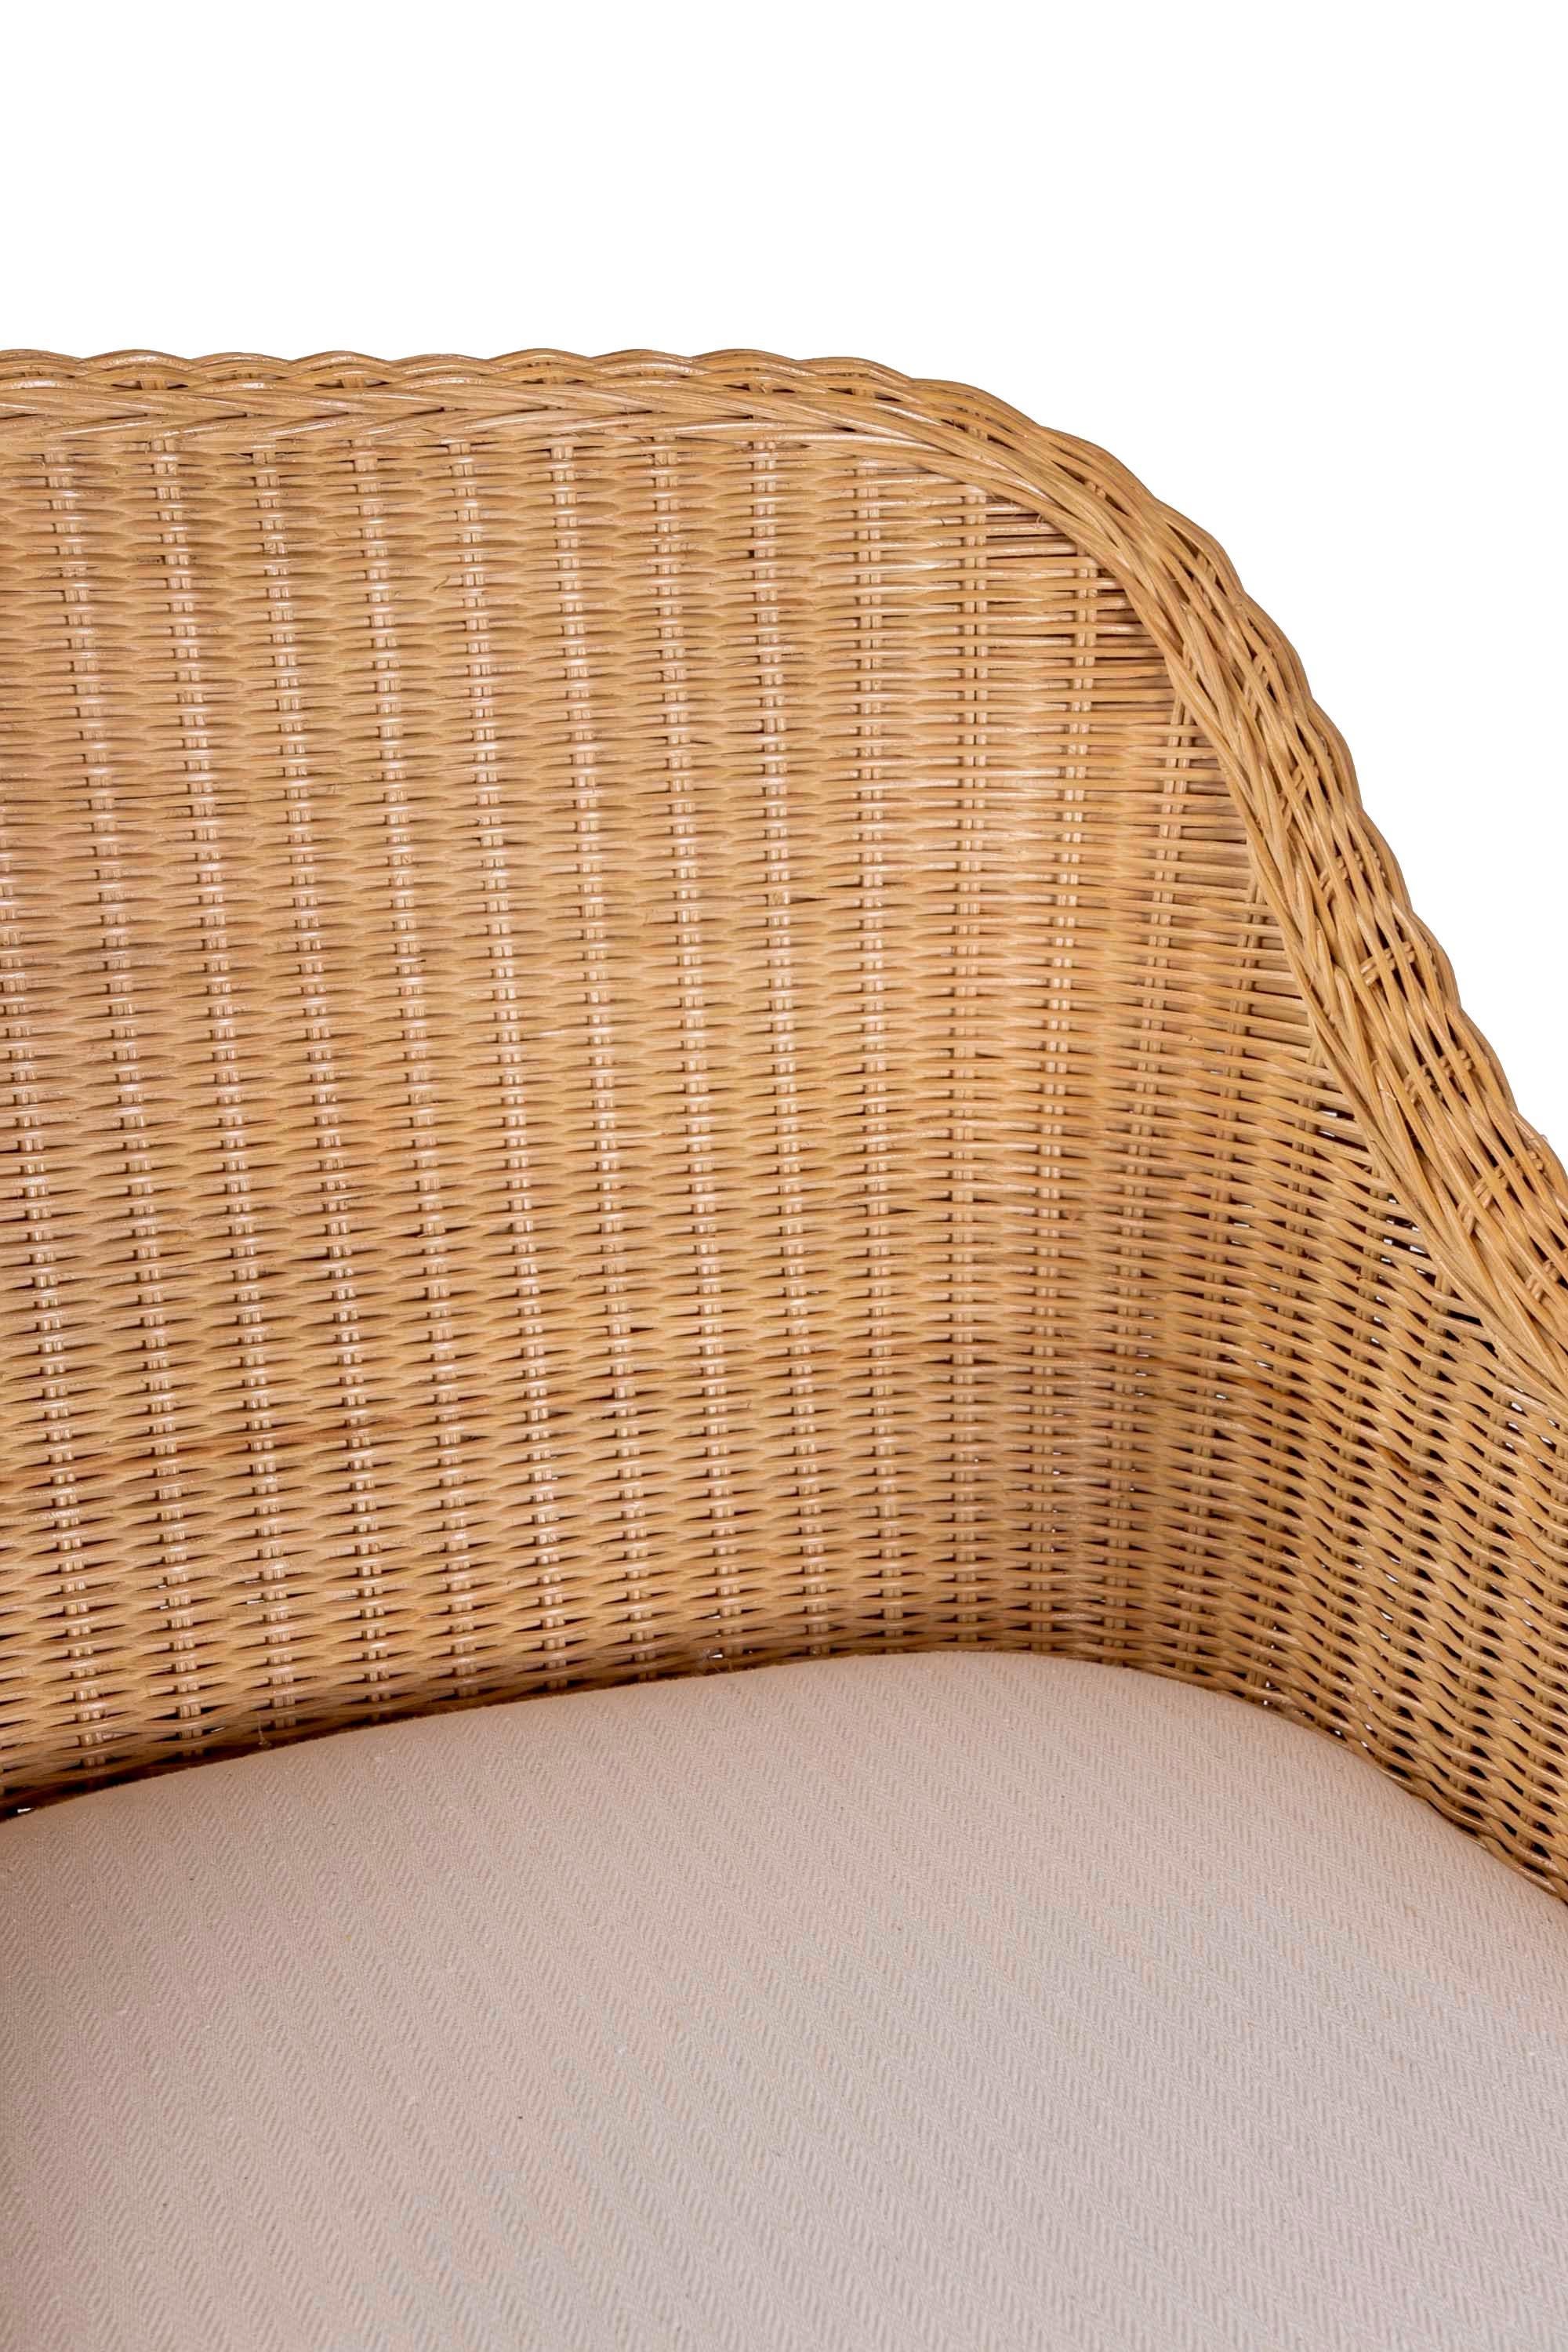 Upholstered Rattan and Wicker Bar stool with Sideways Movement 15